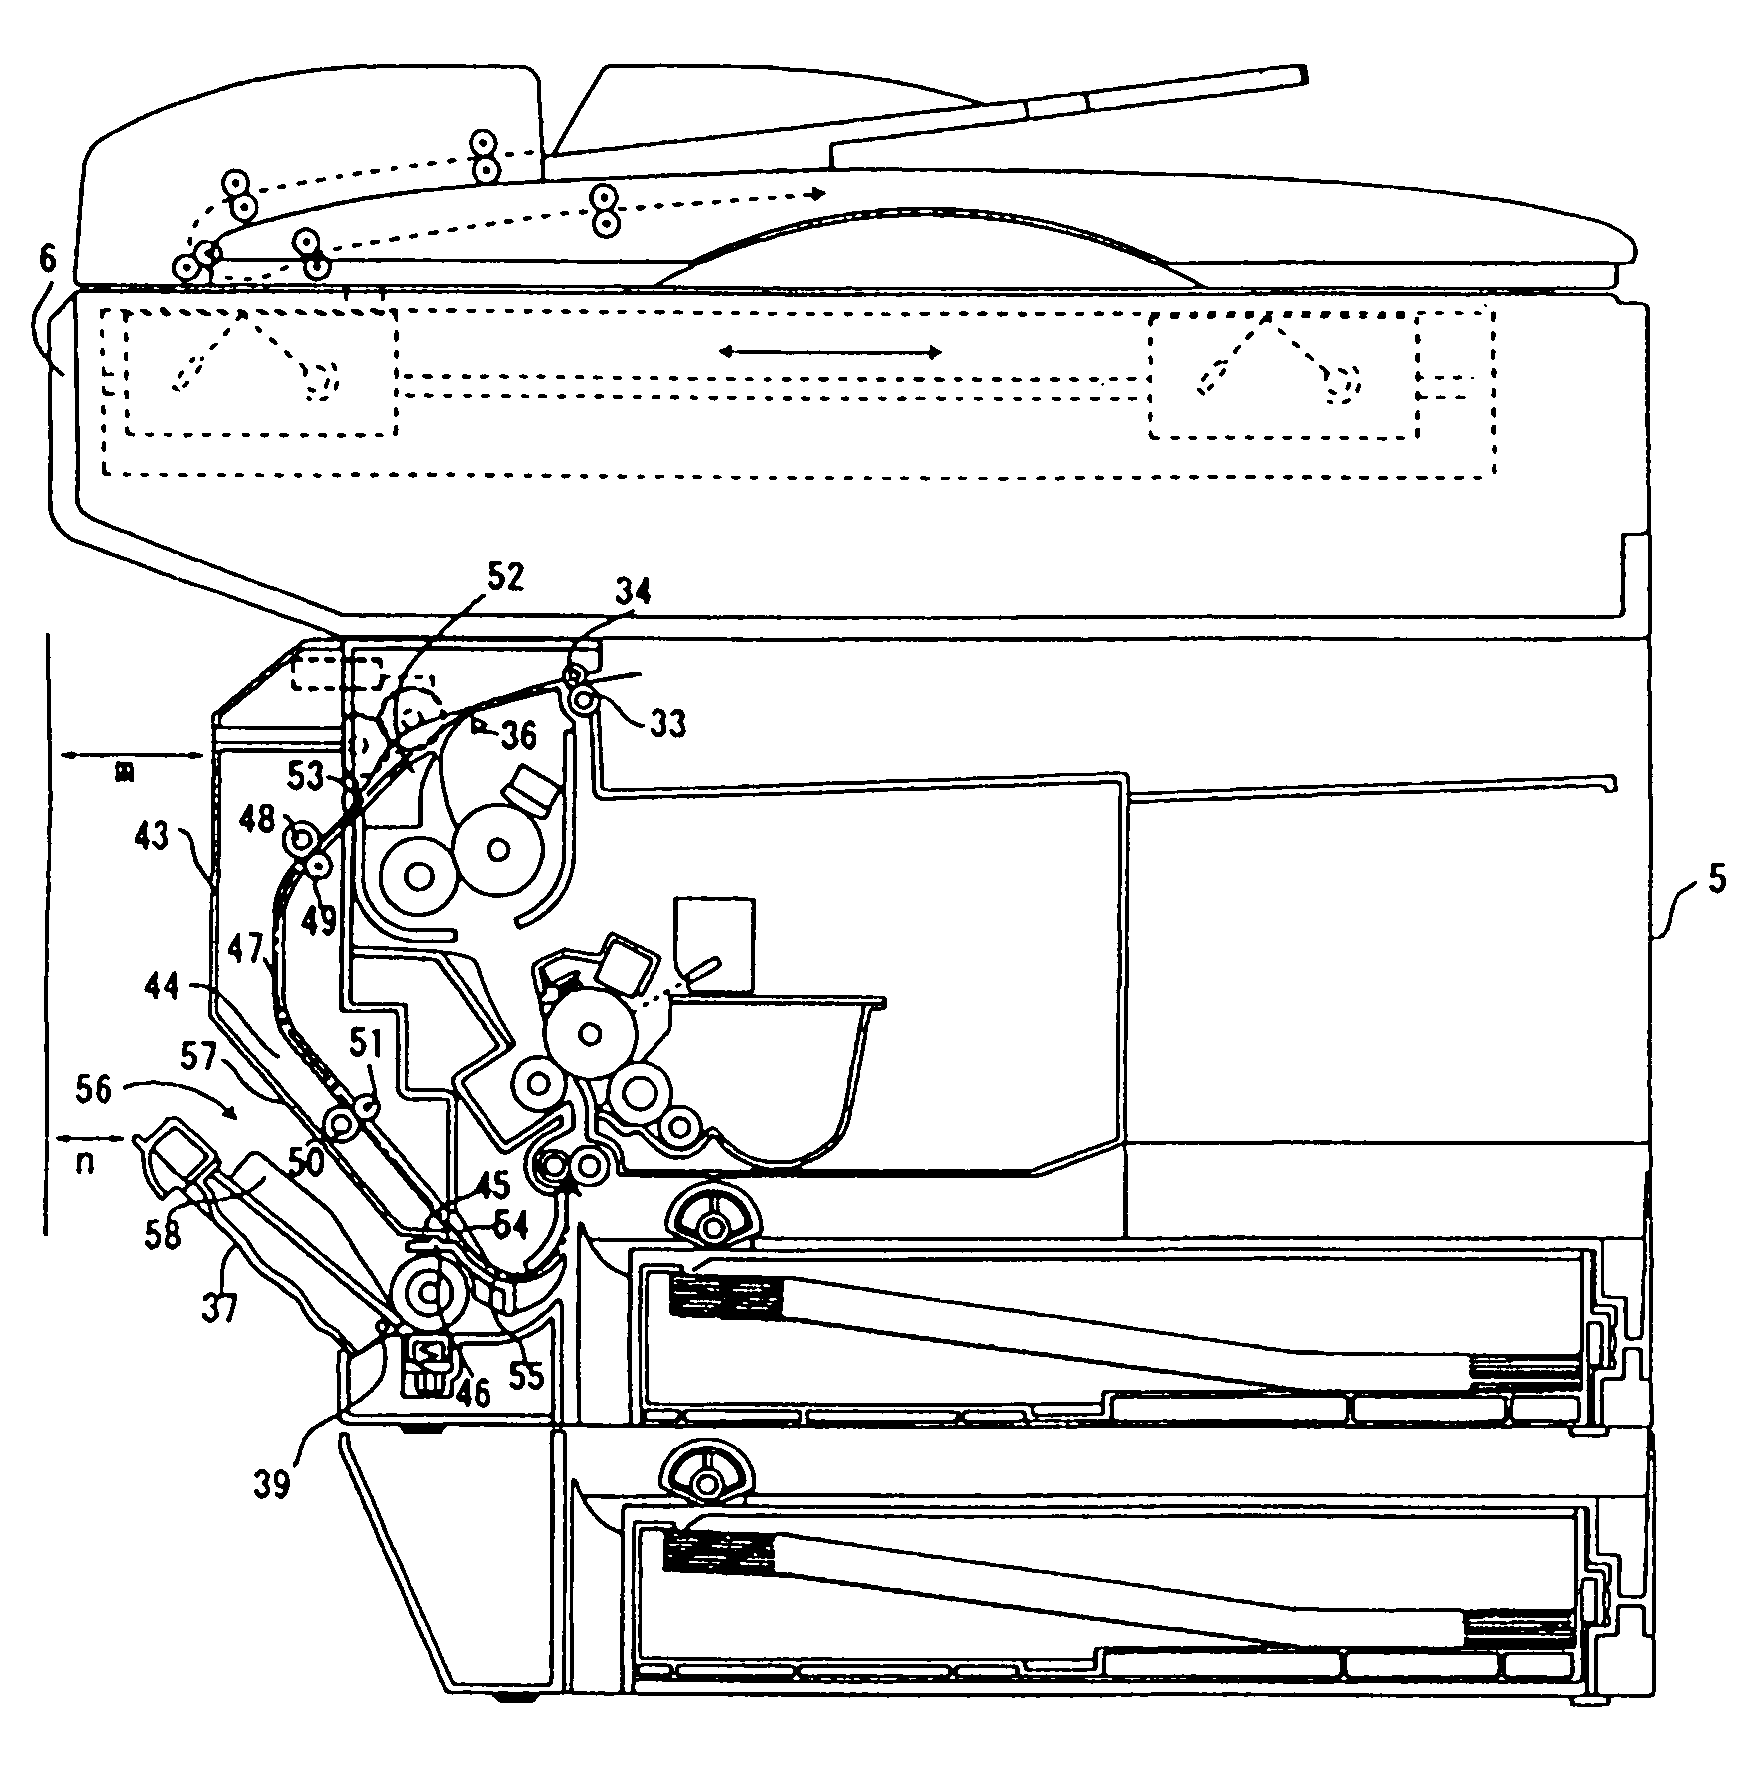 Duplex image forming device and reversible transportation unit